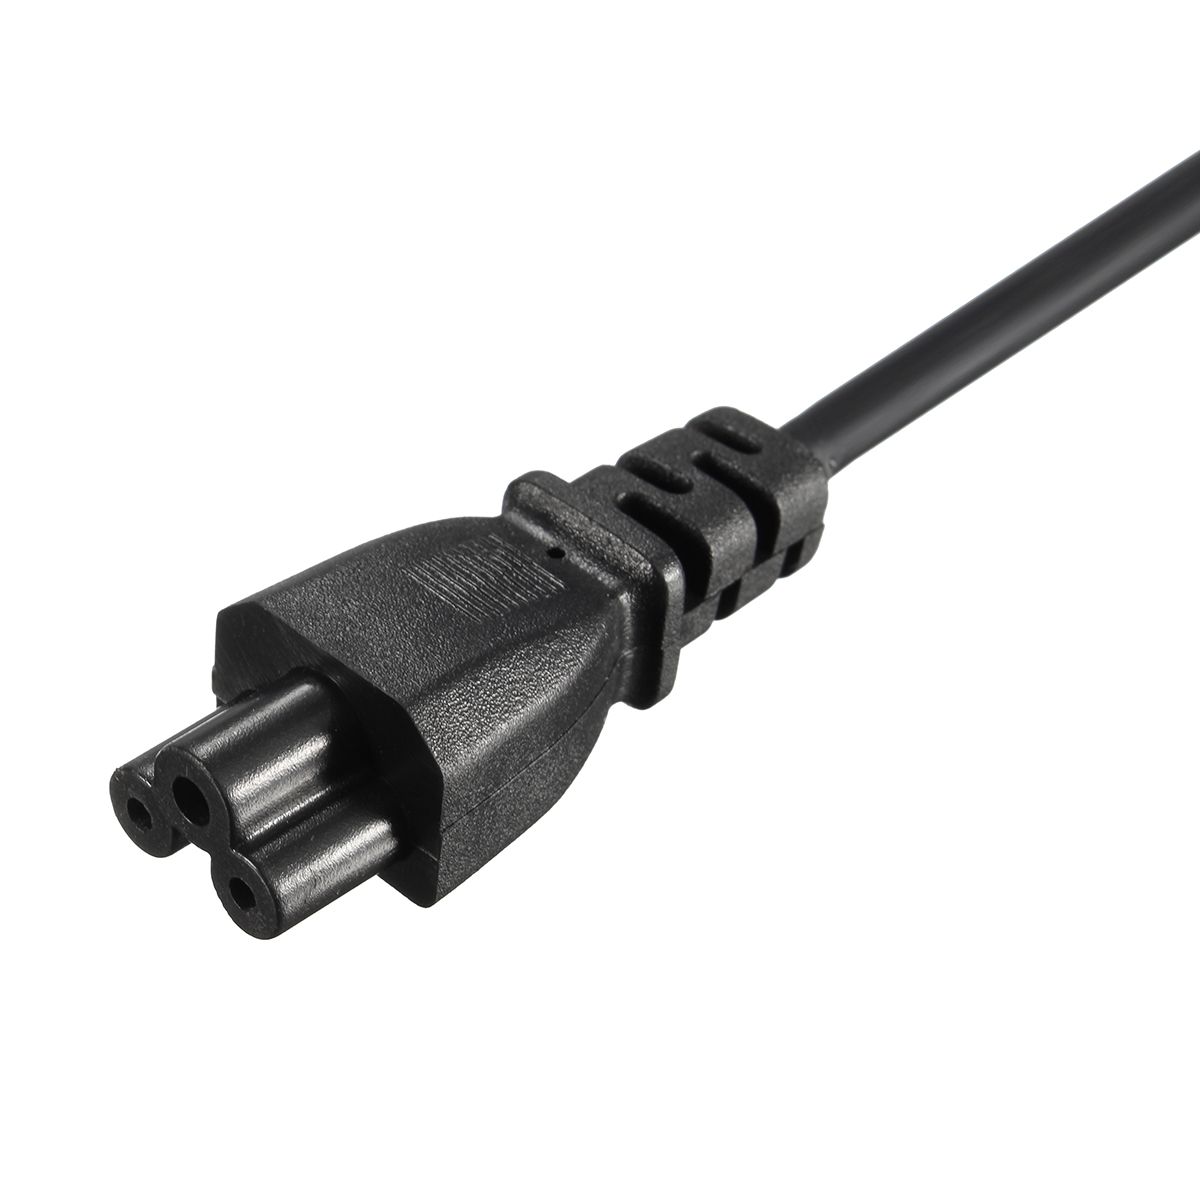 EU-3-Prong-AC-Power-Cord-2-Pin-Adapter-Cable-250V-10A-Interface-Laptop-Ac-Power-Adapter-Netbook-Char-1709044